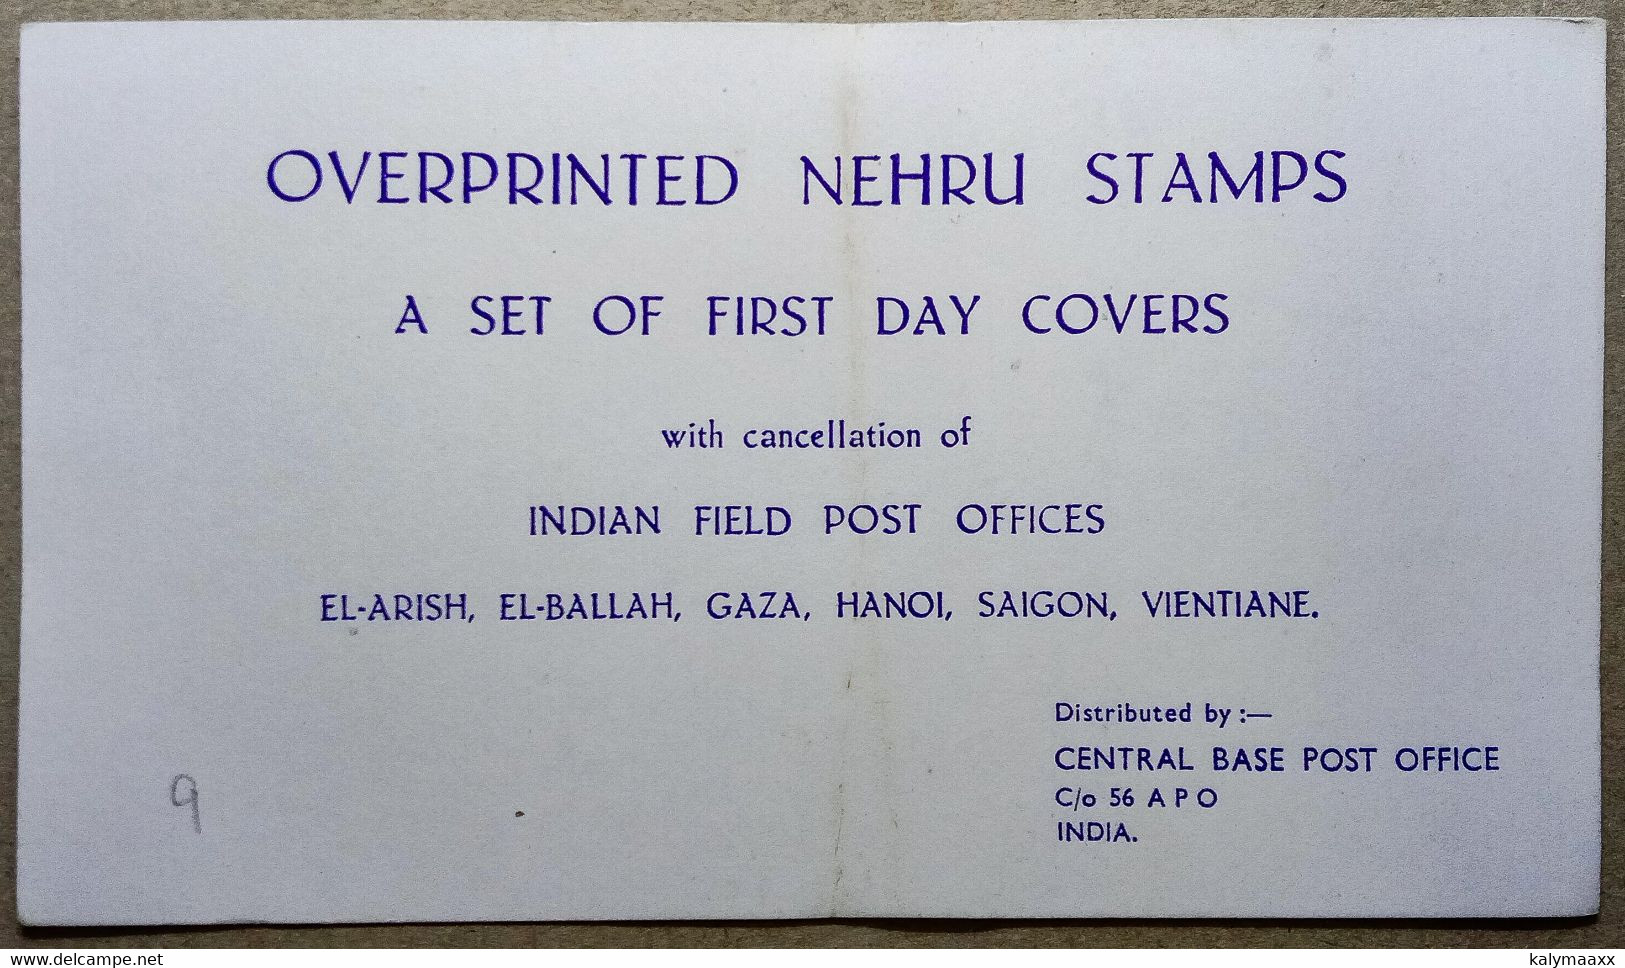 INDIA 1965 ICC & UNEF COMPLETE SET OF 6 F.P.O CANCELLED COVER & INFORMATION BROCHURE, VIETNAM, LAOS, GAZA...RARE - Military Service Stamp